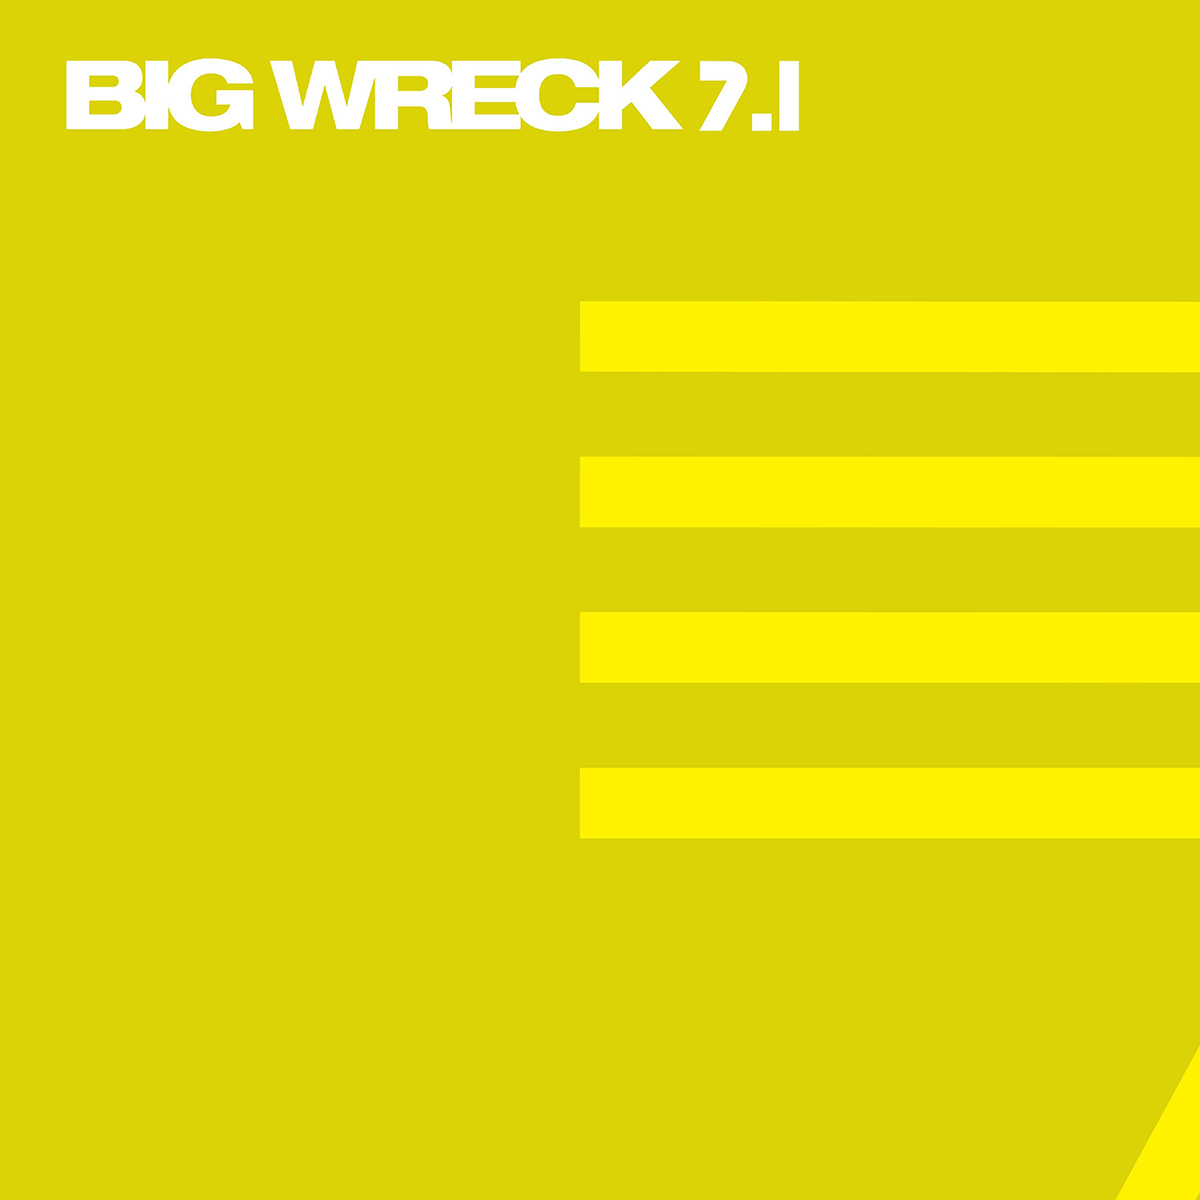 Big Wreck Announce New EP Big Wreck: 7.1 Available November 19 + Tour Dates